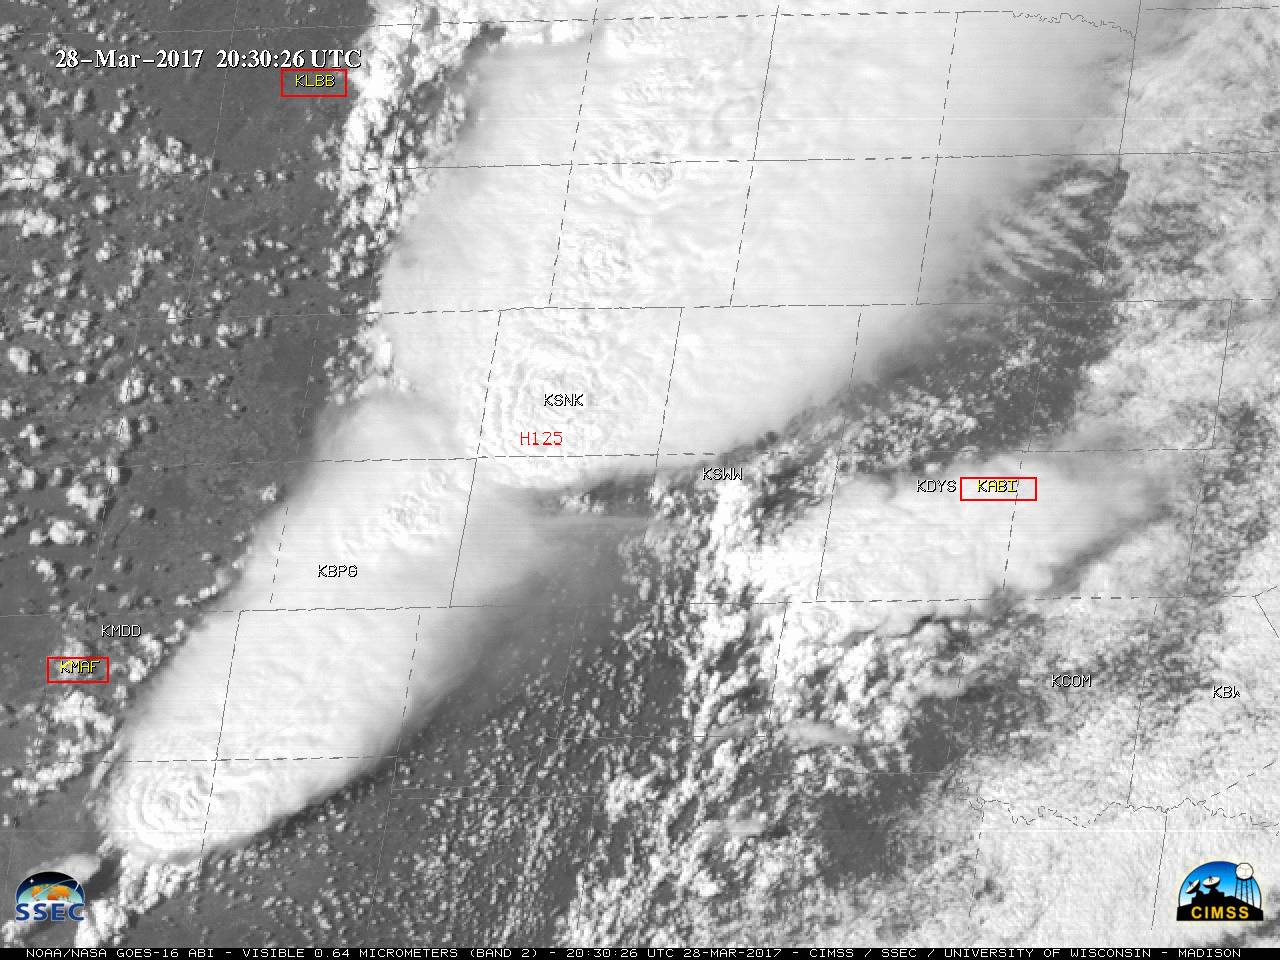 GOES-16 Visible (0.64 µm) image, with station identifiers KLBB, KMAF and KABI highlighted [click to enlarge]